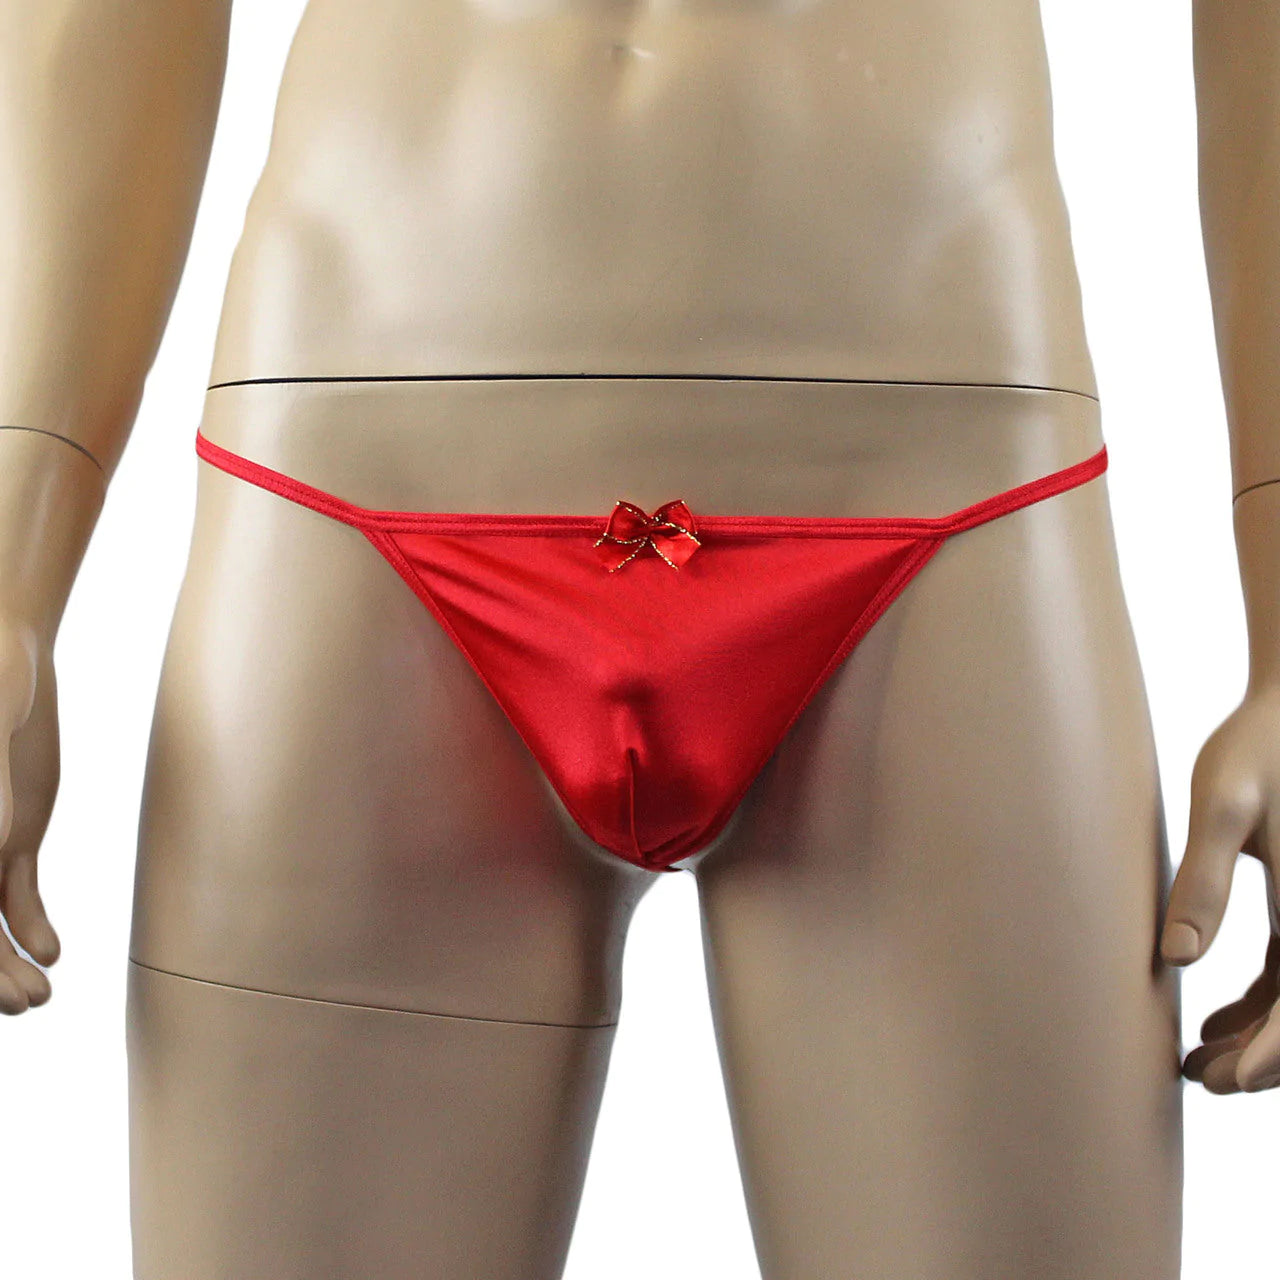 SALE - Mens Xmas Stretch Spandex Pouch G string with Red & Gold Bow